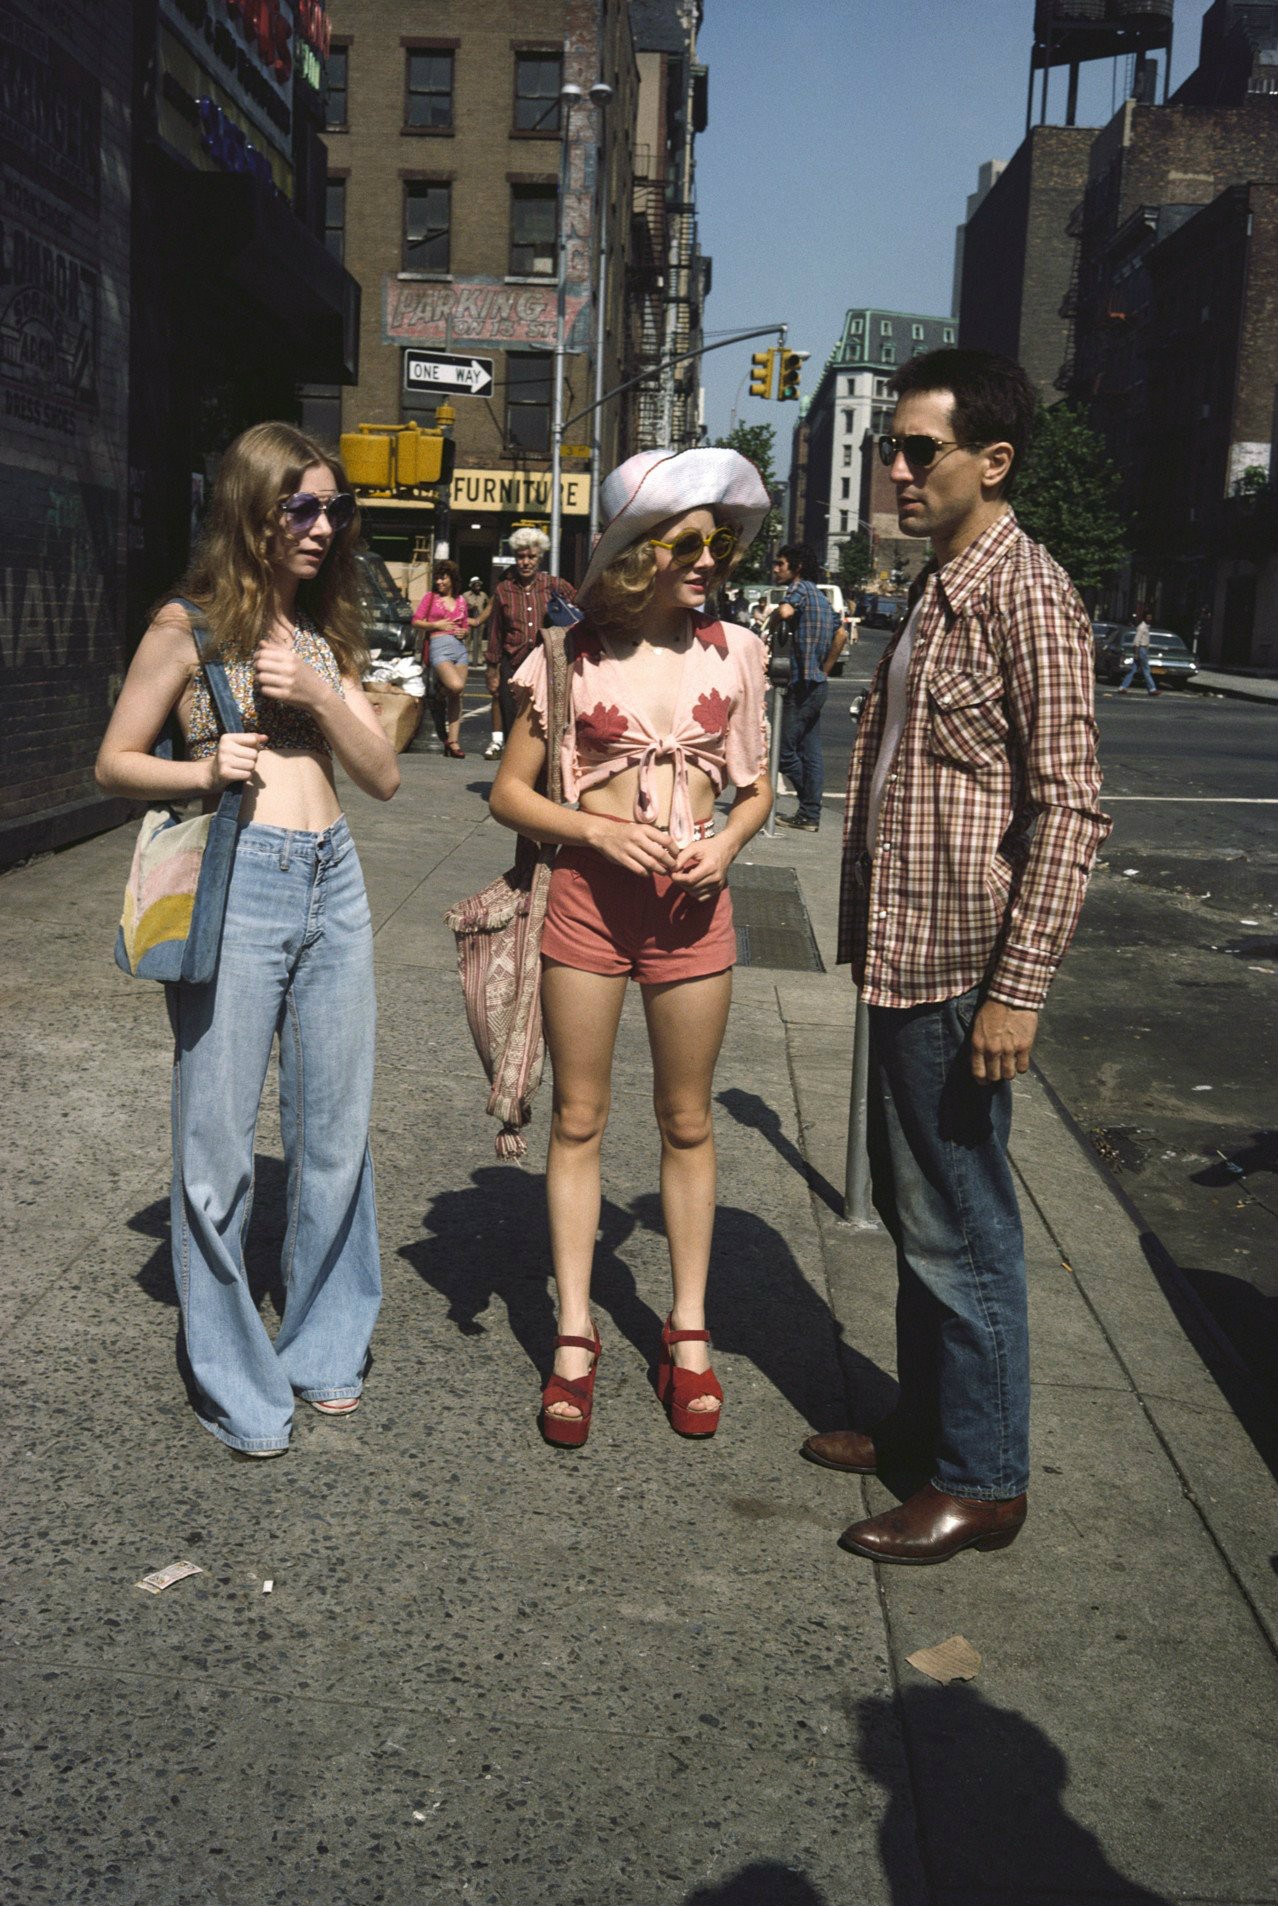 People 1278x1906 architecture building city cityscape street movies film stills actor actress men women Taxi Driver Robert DeNiro Jodie Foster New York City sunglasses portrait display 1970s jeans shorts people